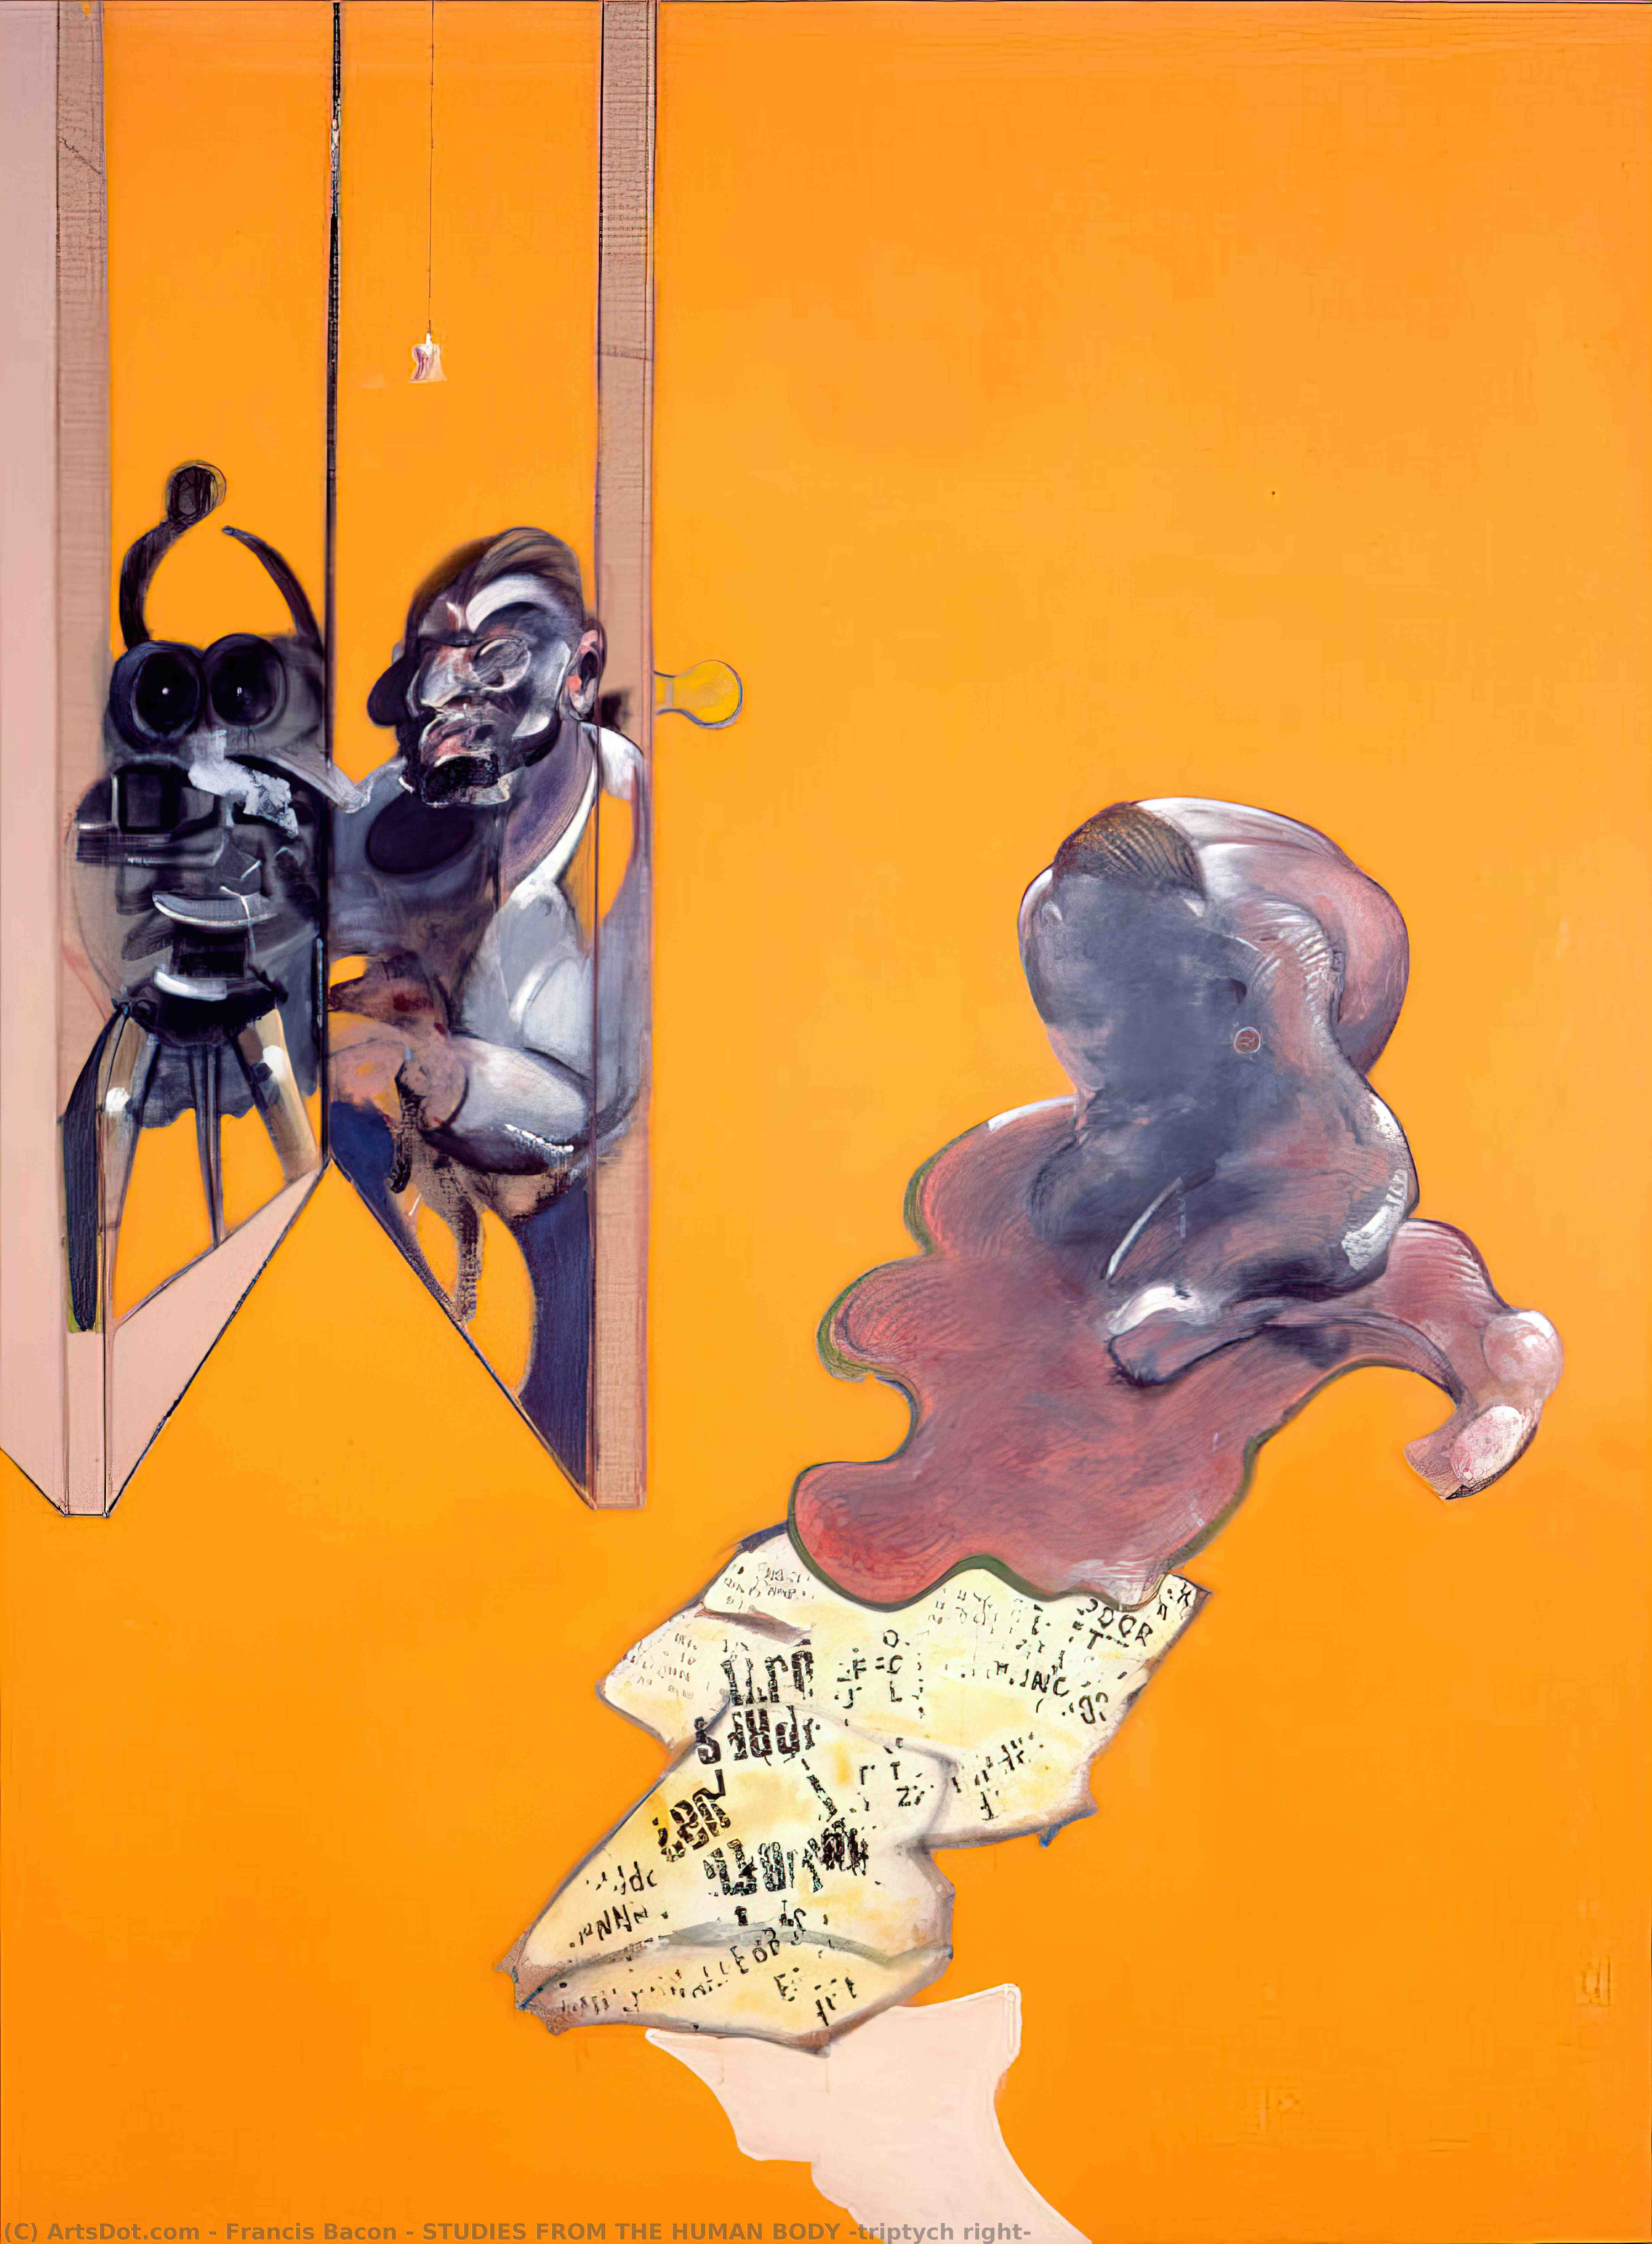 WikiOO.org - Encyclopedia of Fine Arts - Malba, Artwork Francis Bacon - STUDIES FROM THE HUMAN BODY (triptych right)